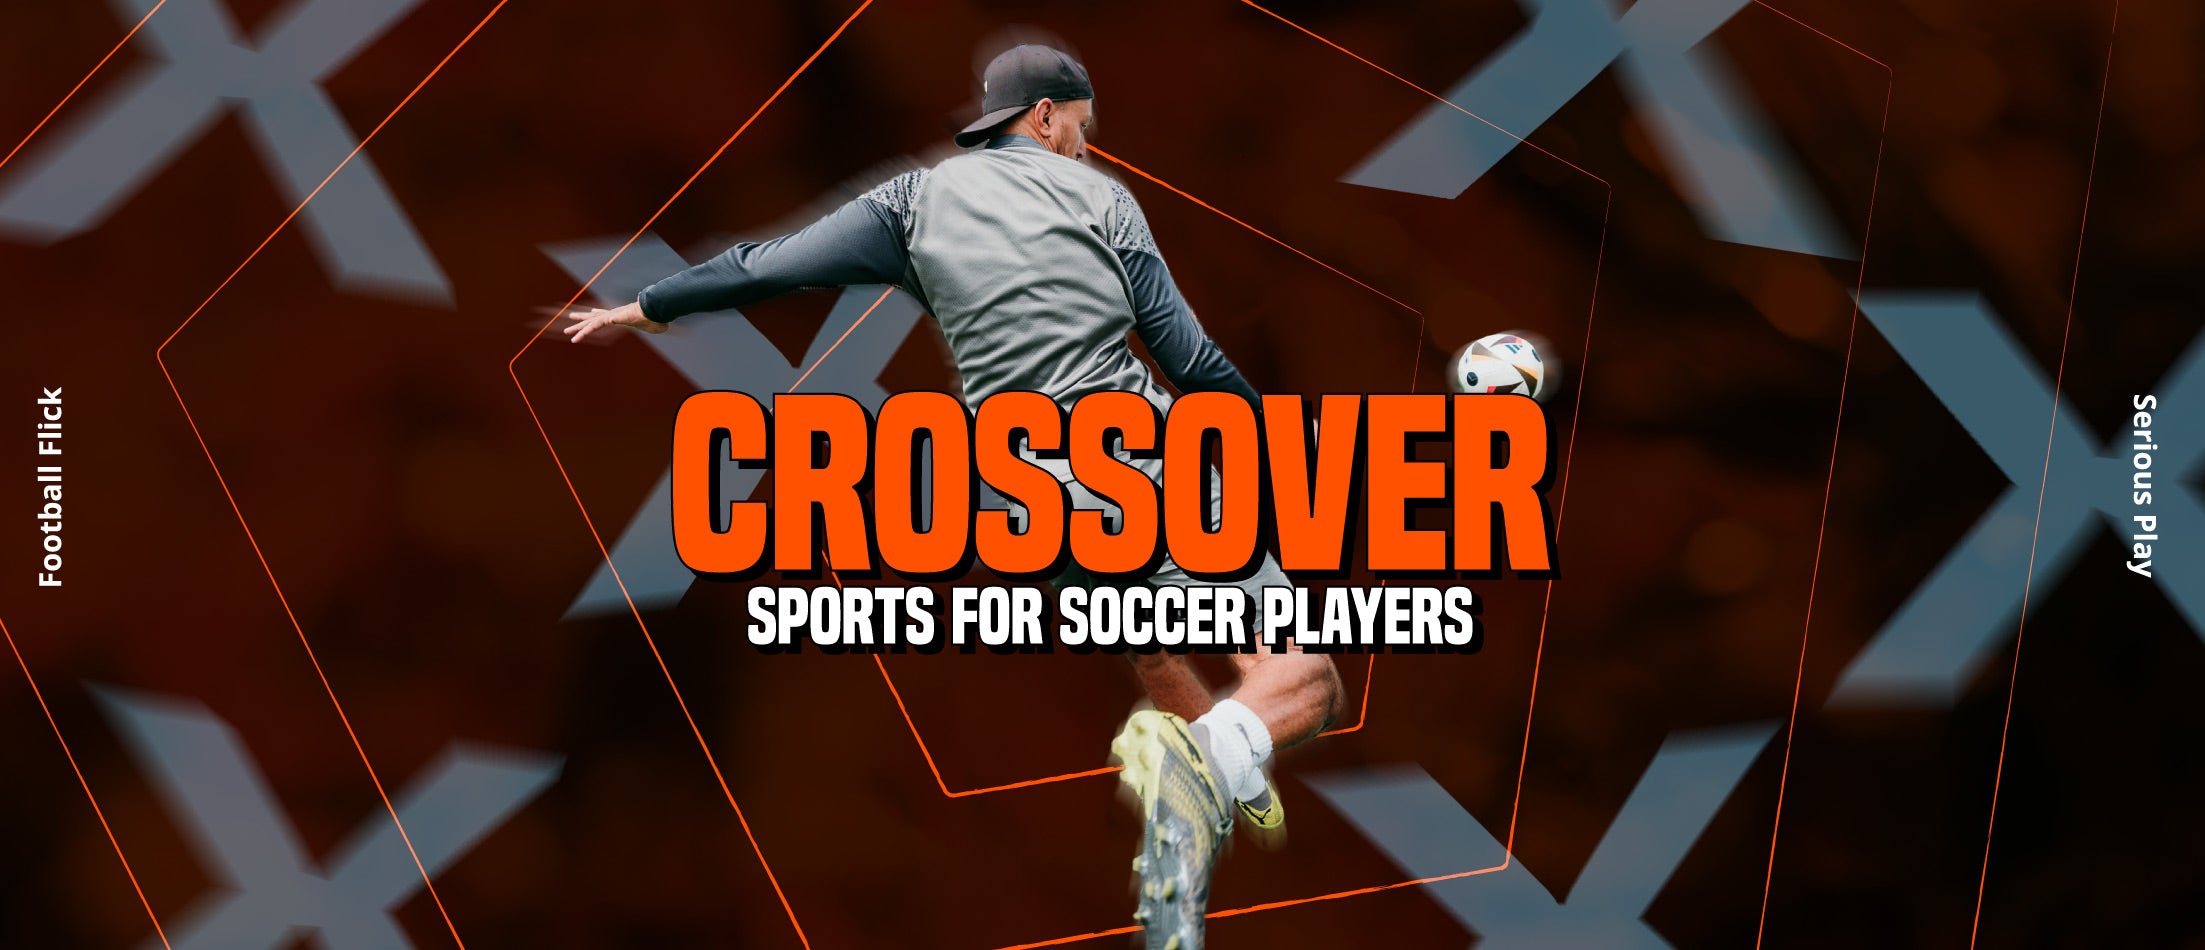 5 Best Crossover Sports for Soccer Players